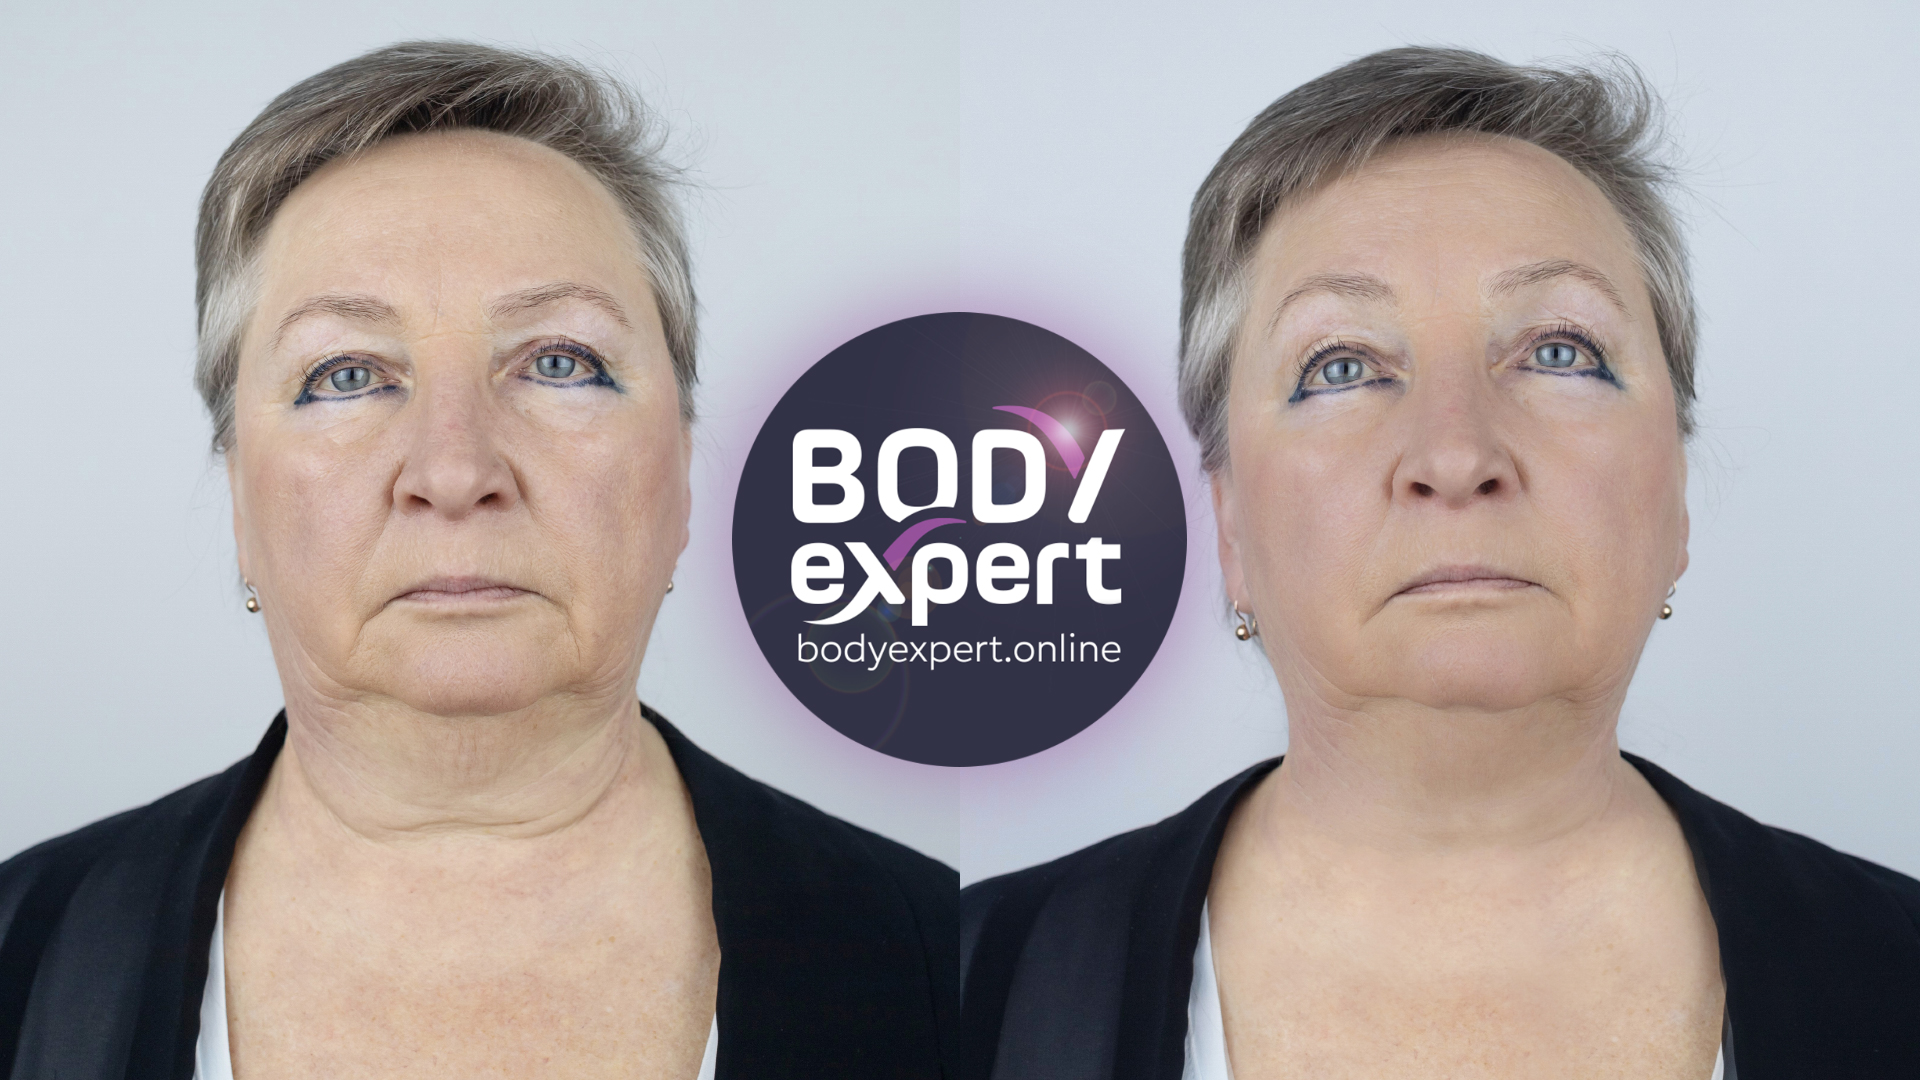 neck liposuction - before and after - face view